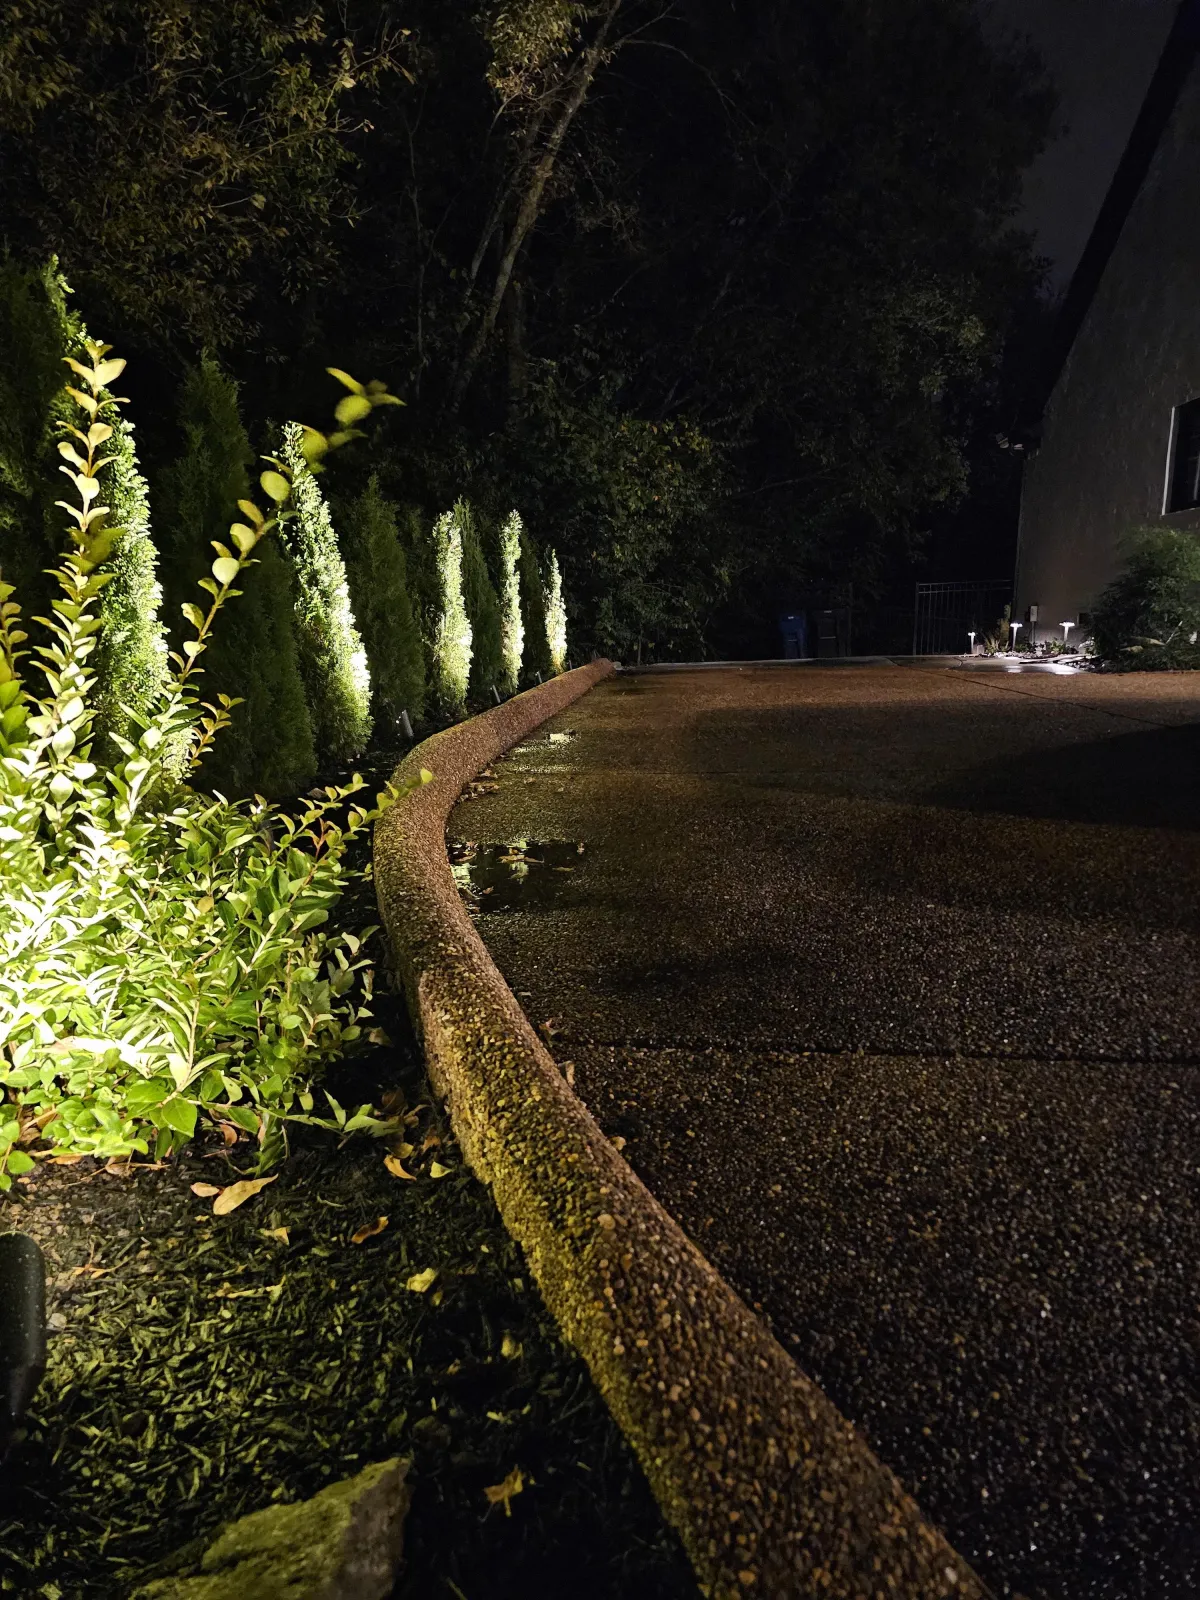 It's Evening, the Driveway welcomes you Home with tasteful and Elegant Lighting on the Tree line and the Garden. The Pathway contrasts against the organic greenery. as the light and shadows dance in the driveway.